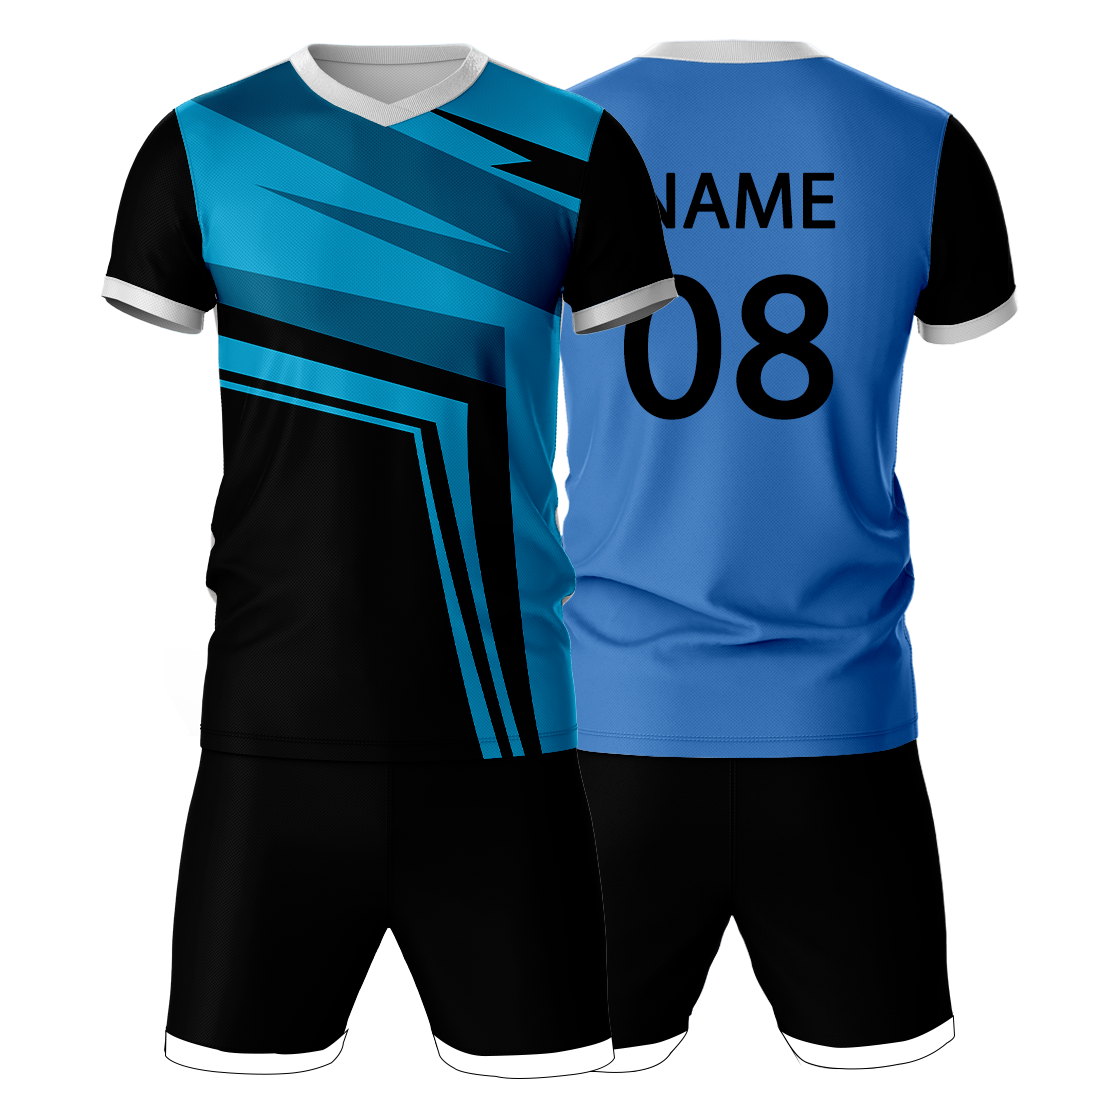 All Over Printed Jersey With Shorts Name & Number Printed.NP50000680